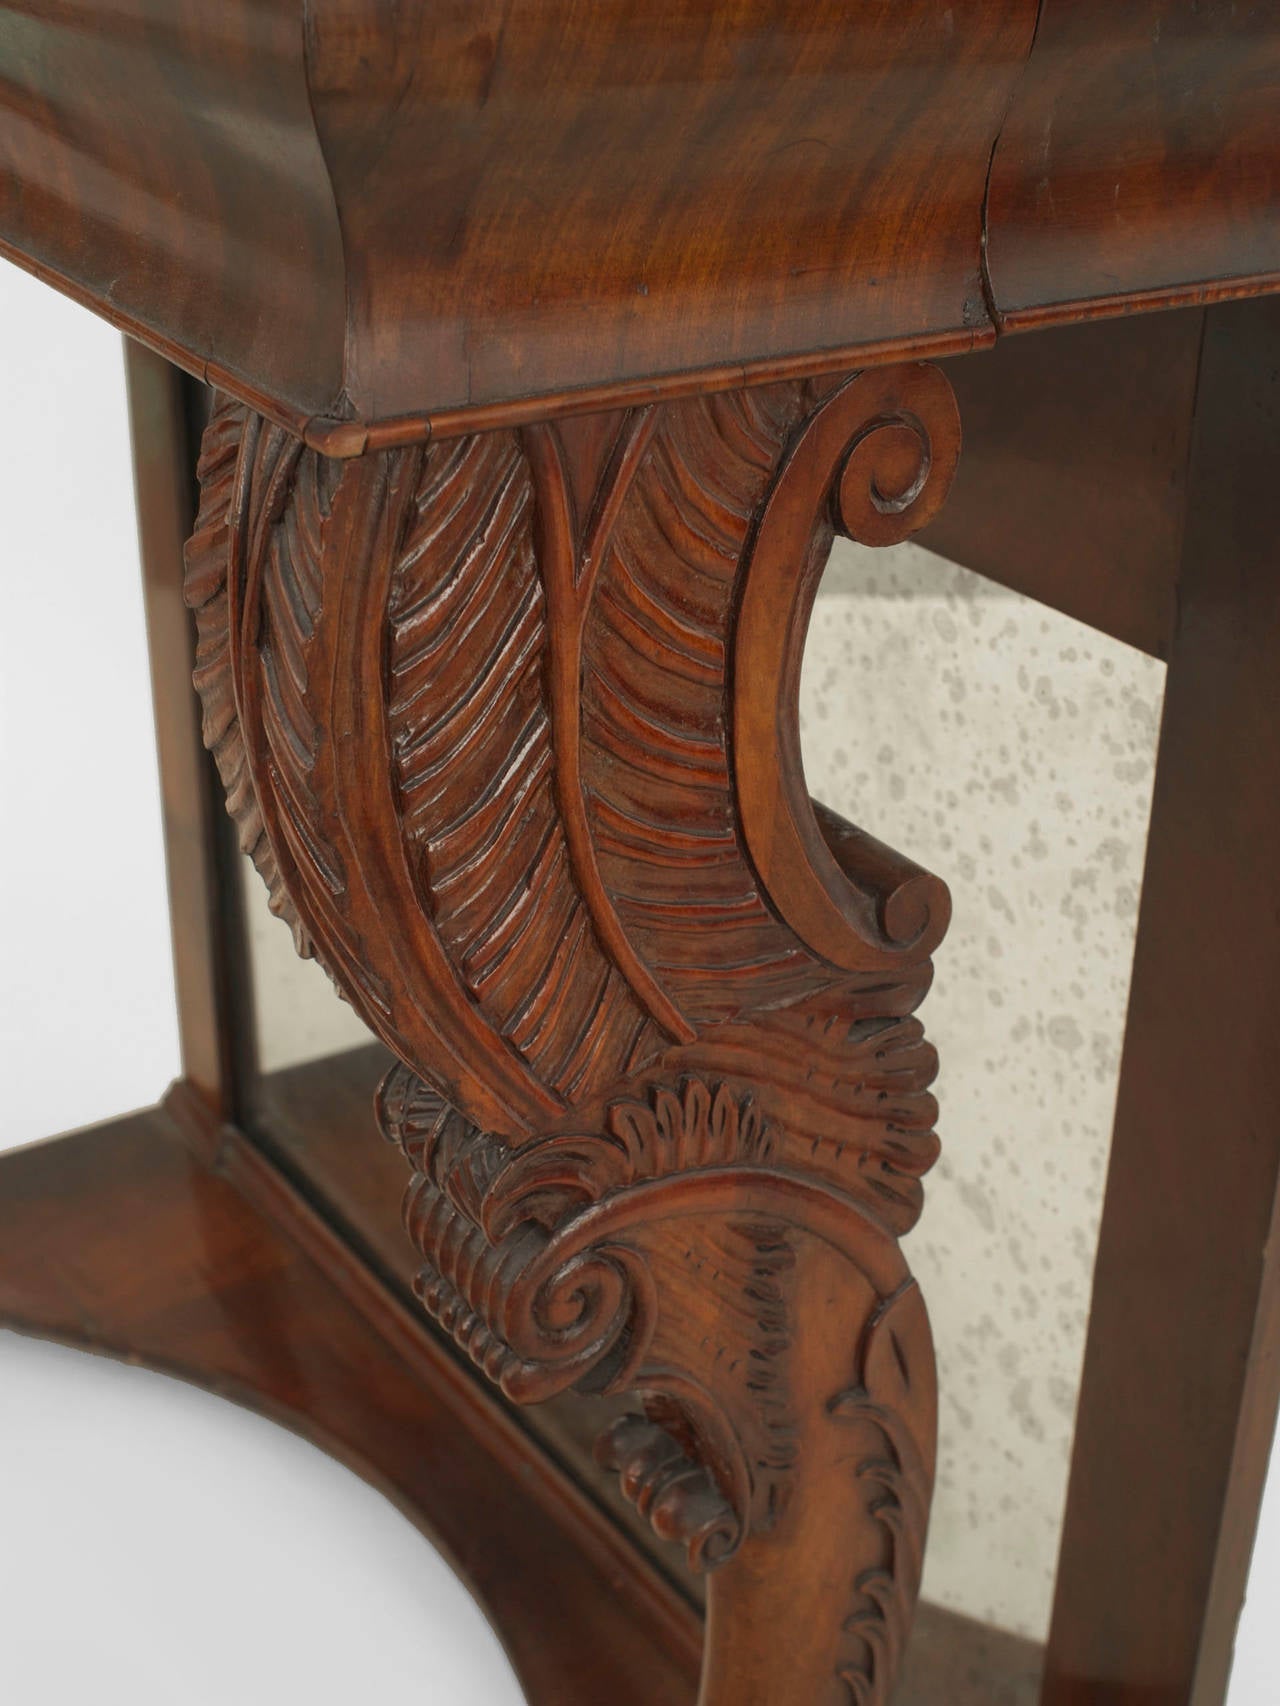 English Regency (circa 1820) mahogany narrow console table with acanthus carved legs ending in paw feet and a mirrored back.
